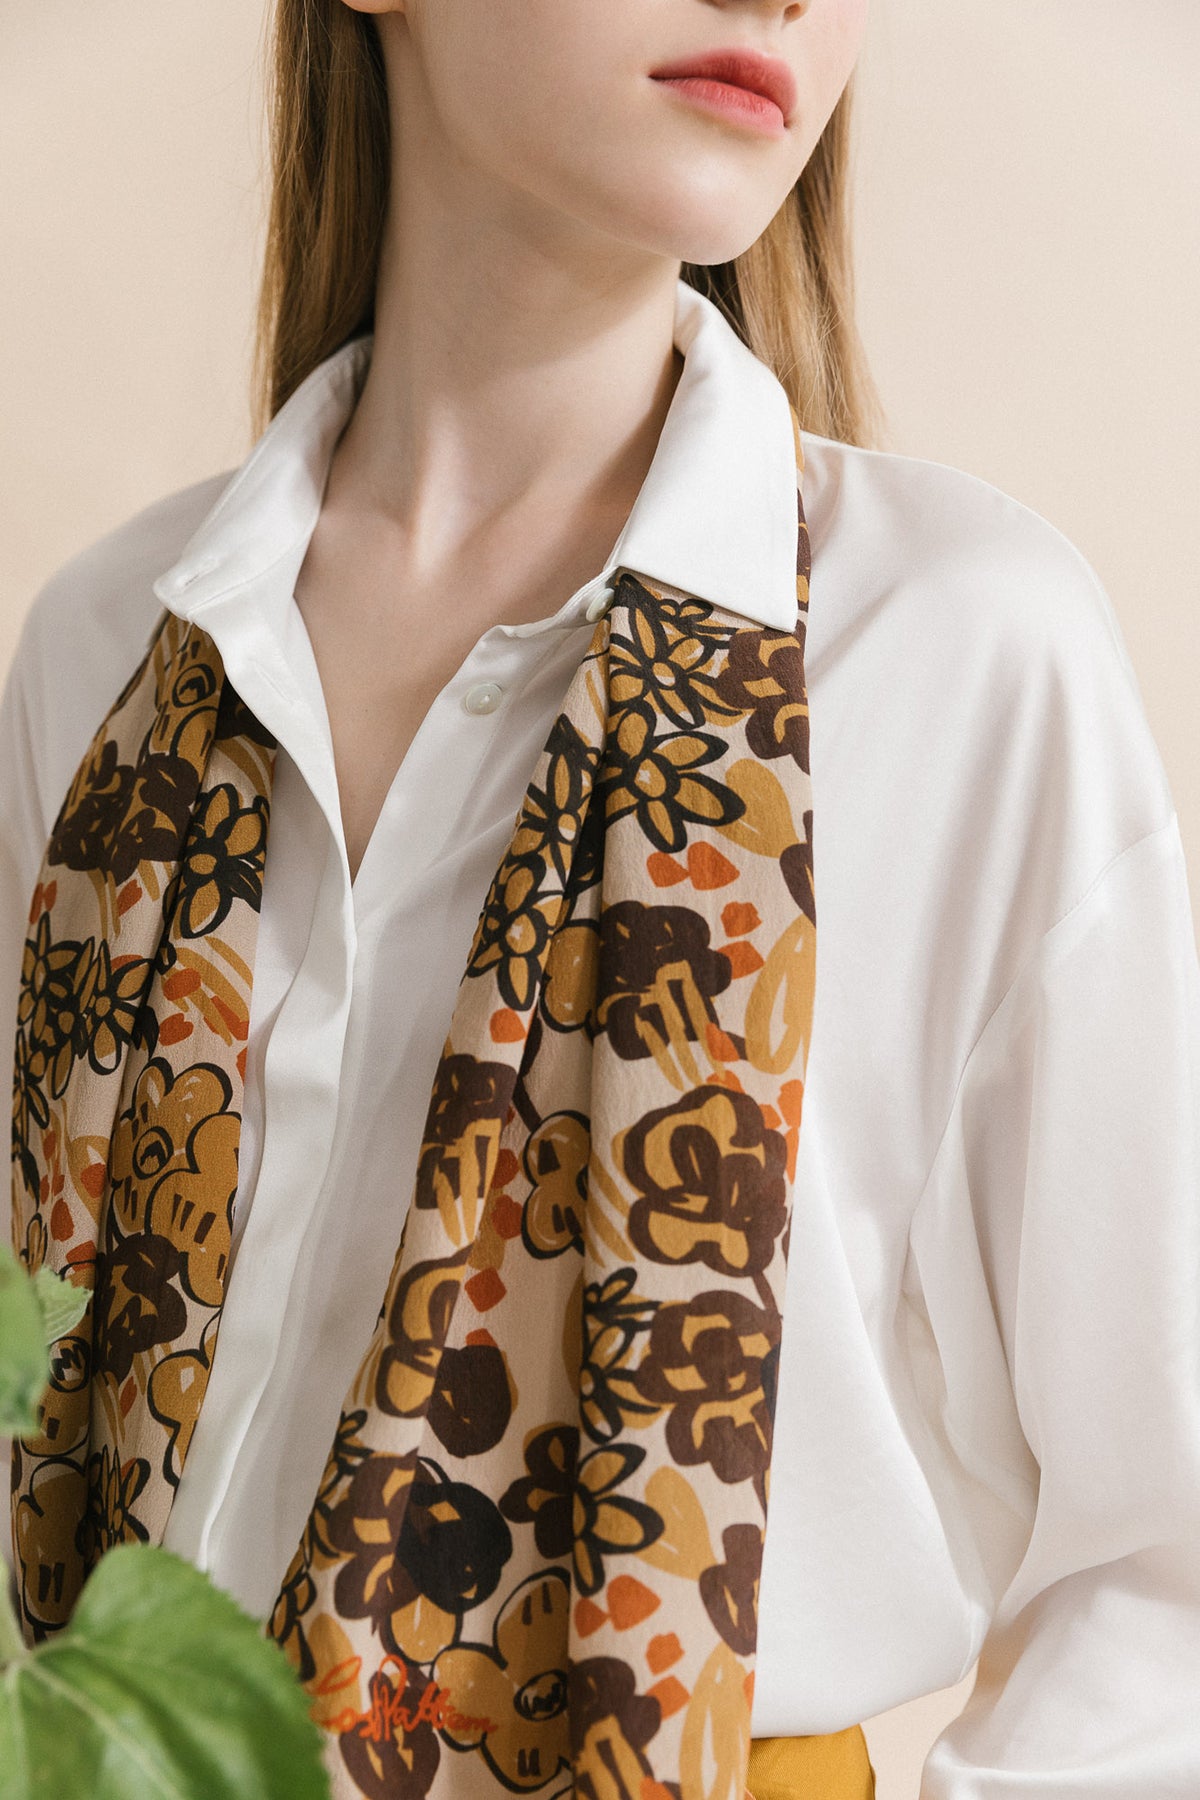 Autumn Print Floral Scarf | Fall Floral Ladies Neck Scarf in Brown, Gold,  and Green 